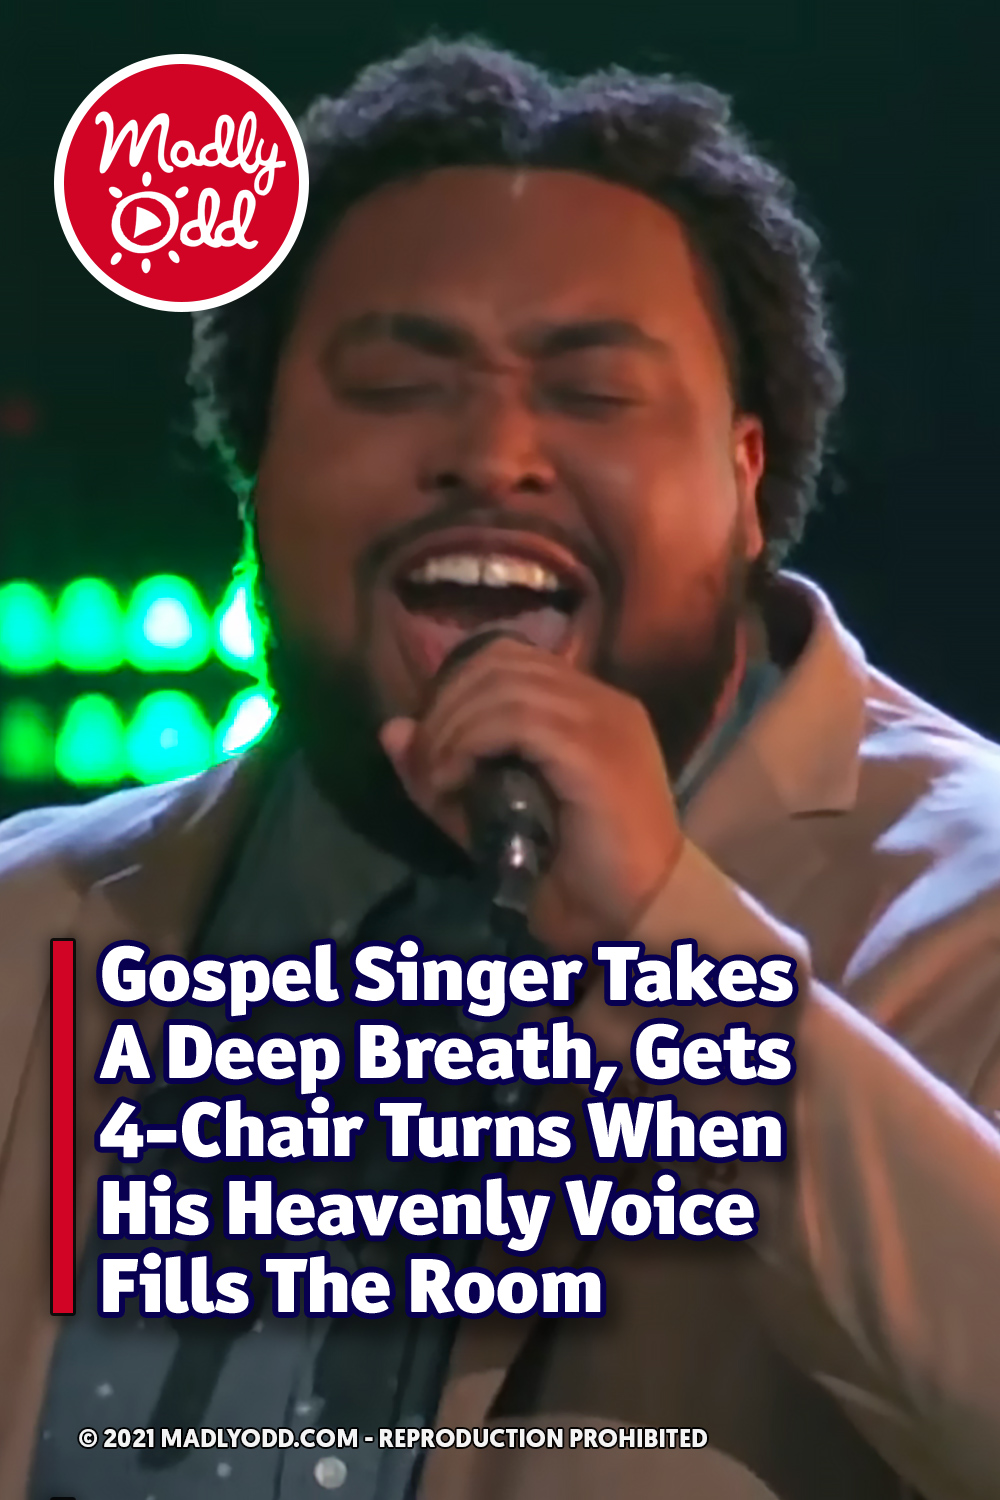 Gospel Singer Takes A Deep Breath, Gets 4-Chair Turns When His Heavenly Voice Fills The Room